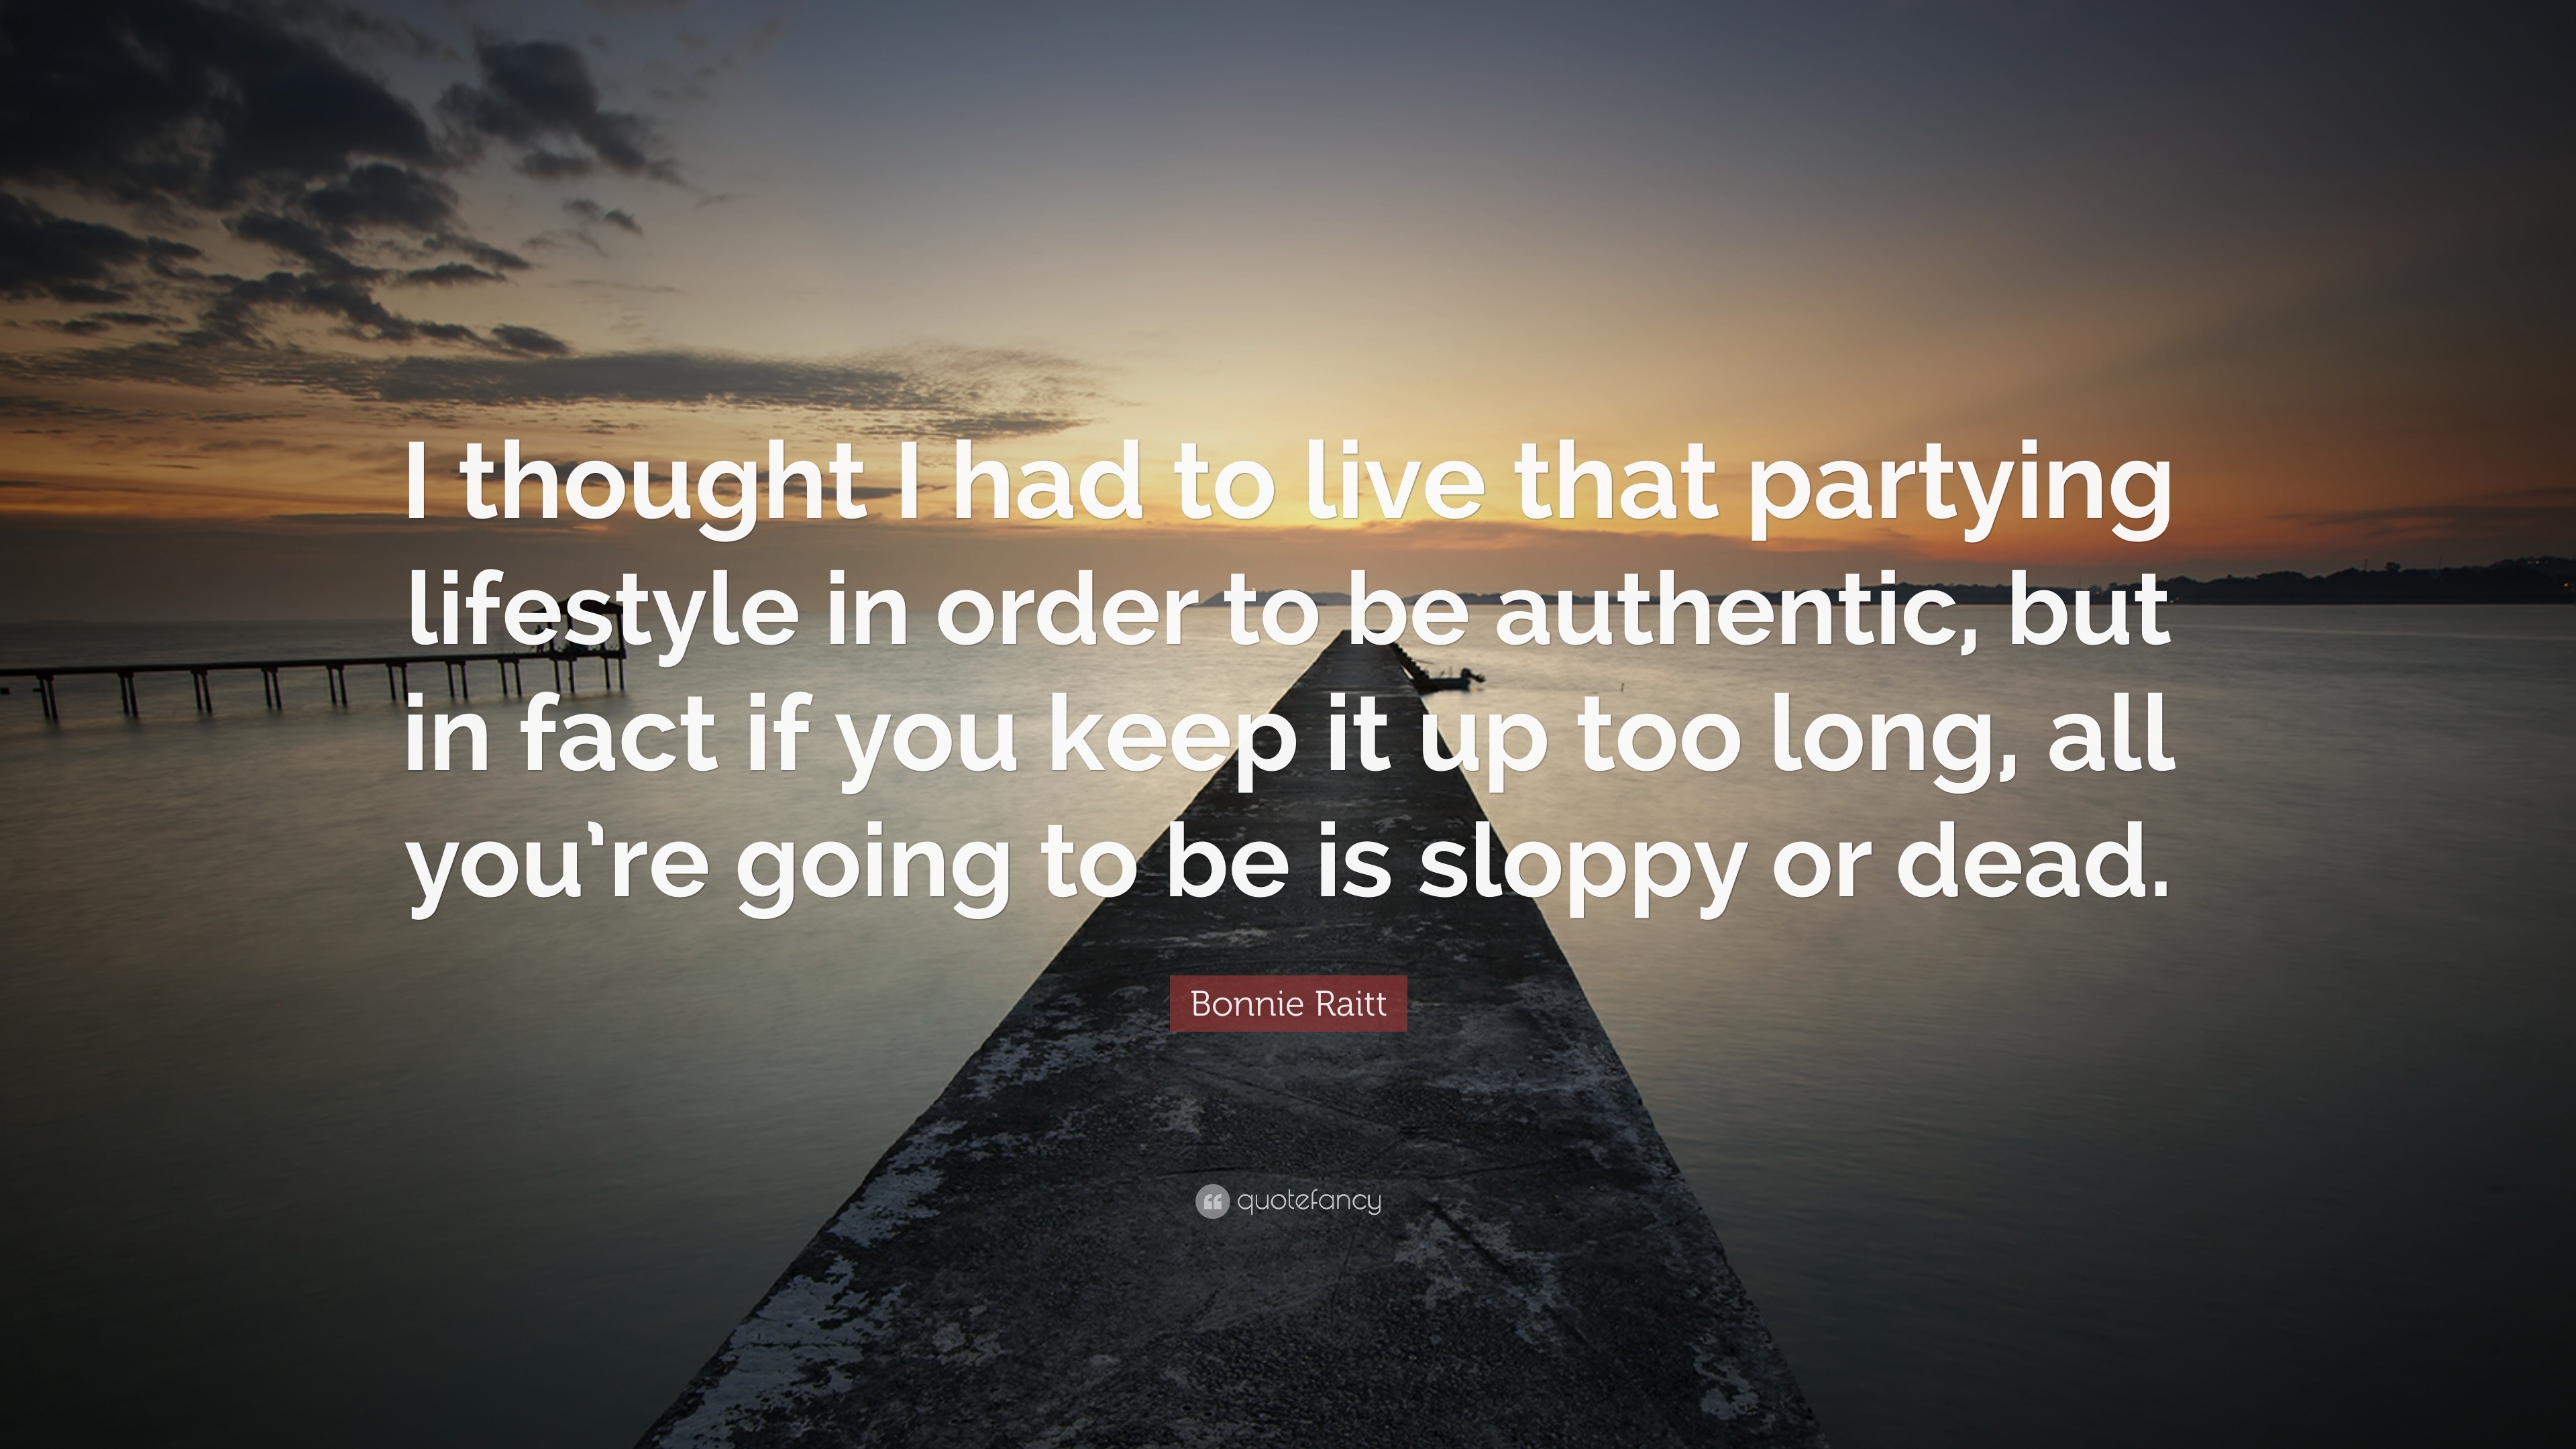 Bonnie Raitt Quote “I thought I had to live that partying lifestyle in order